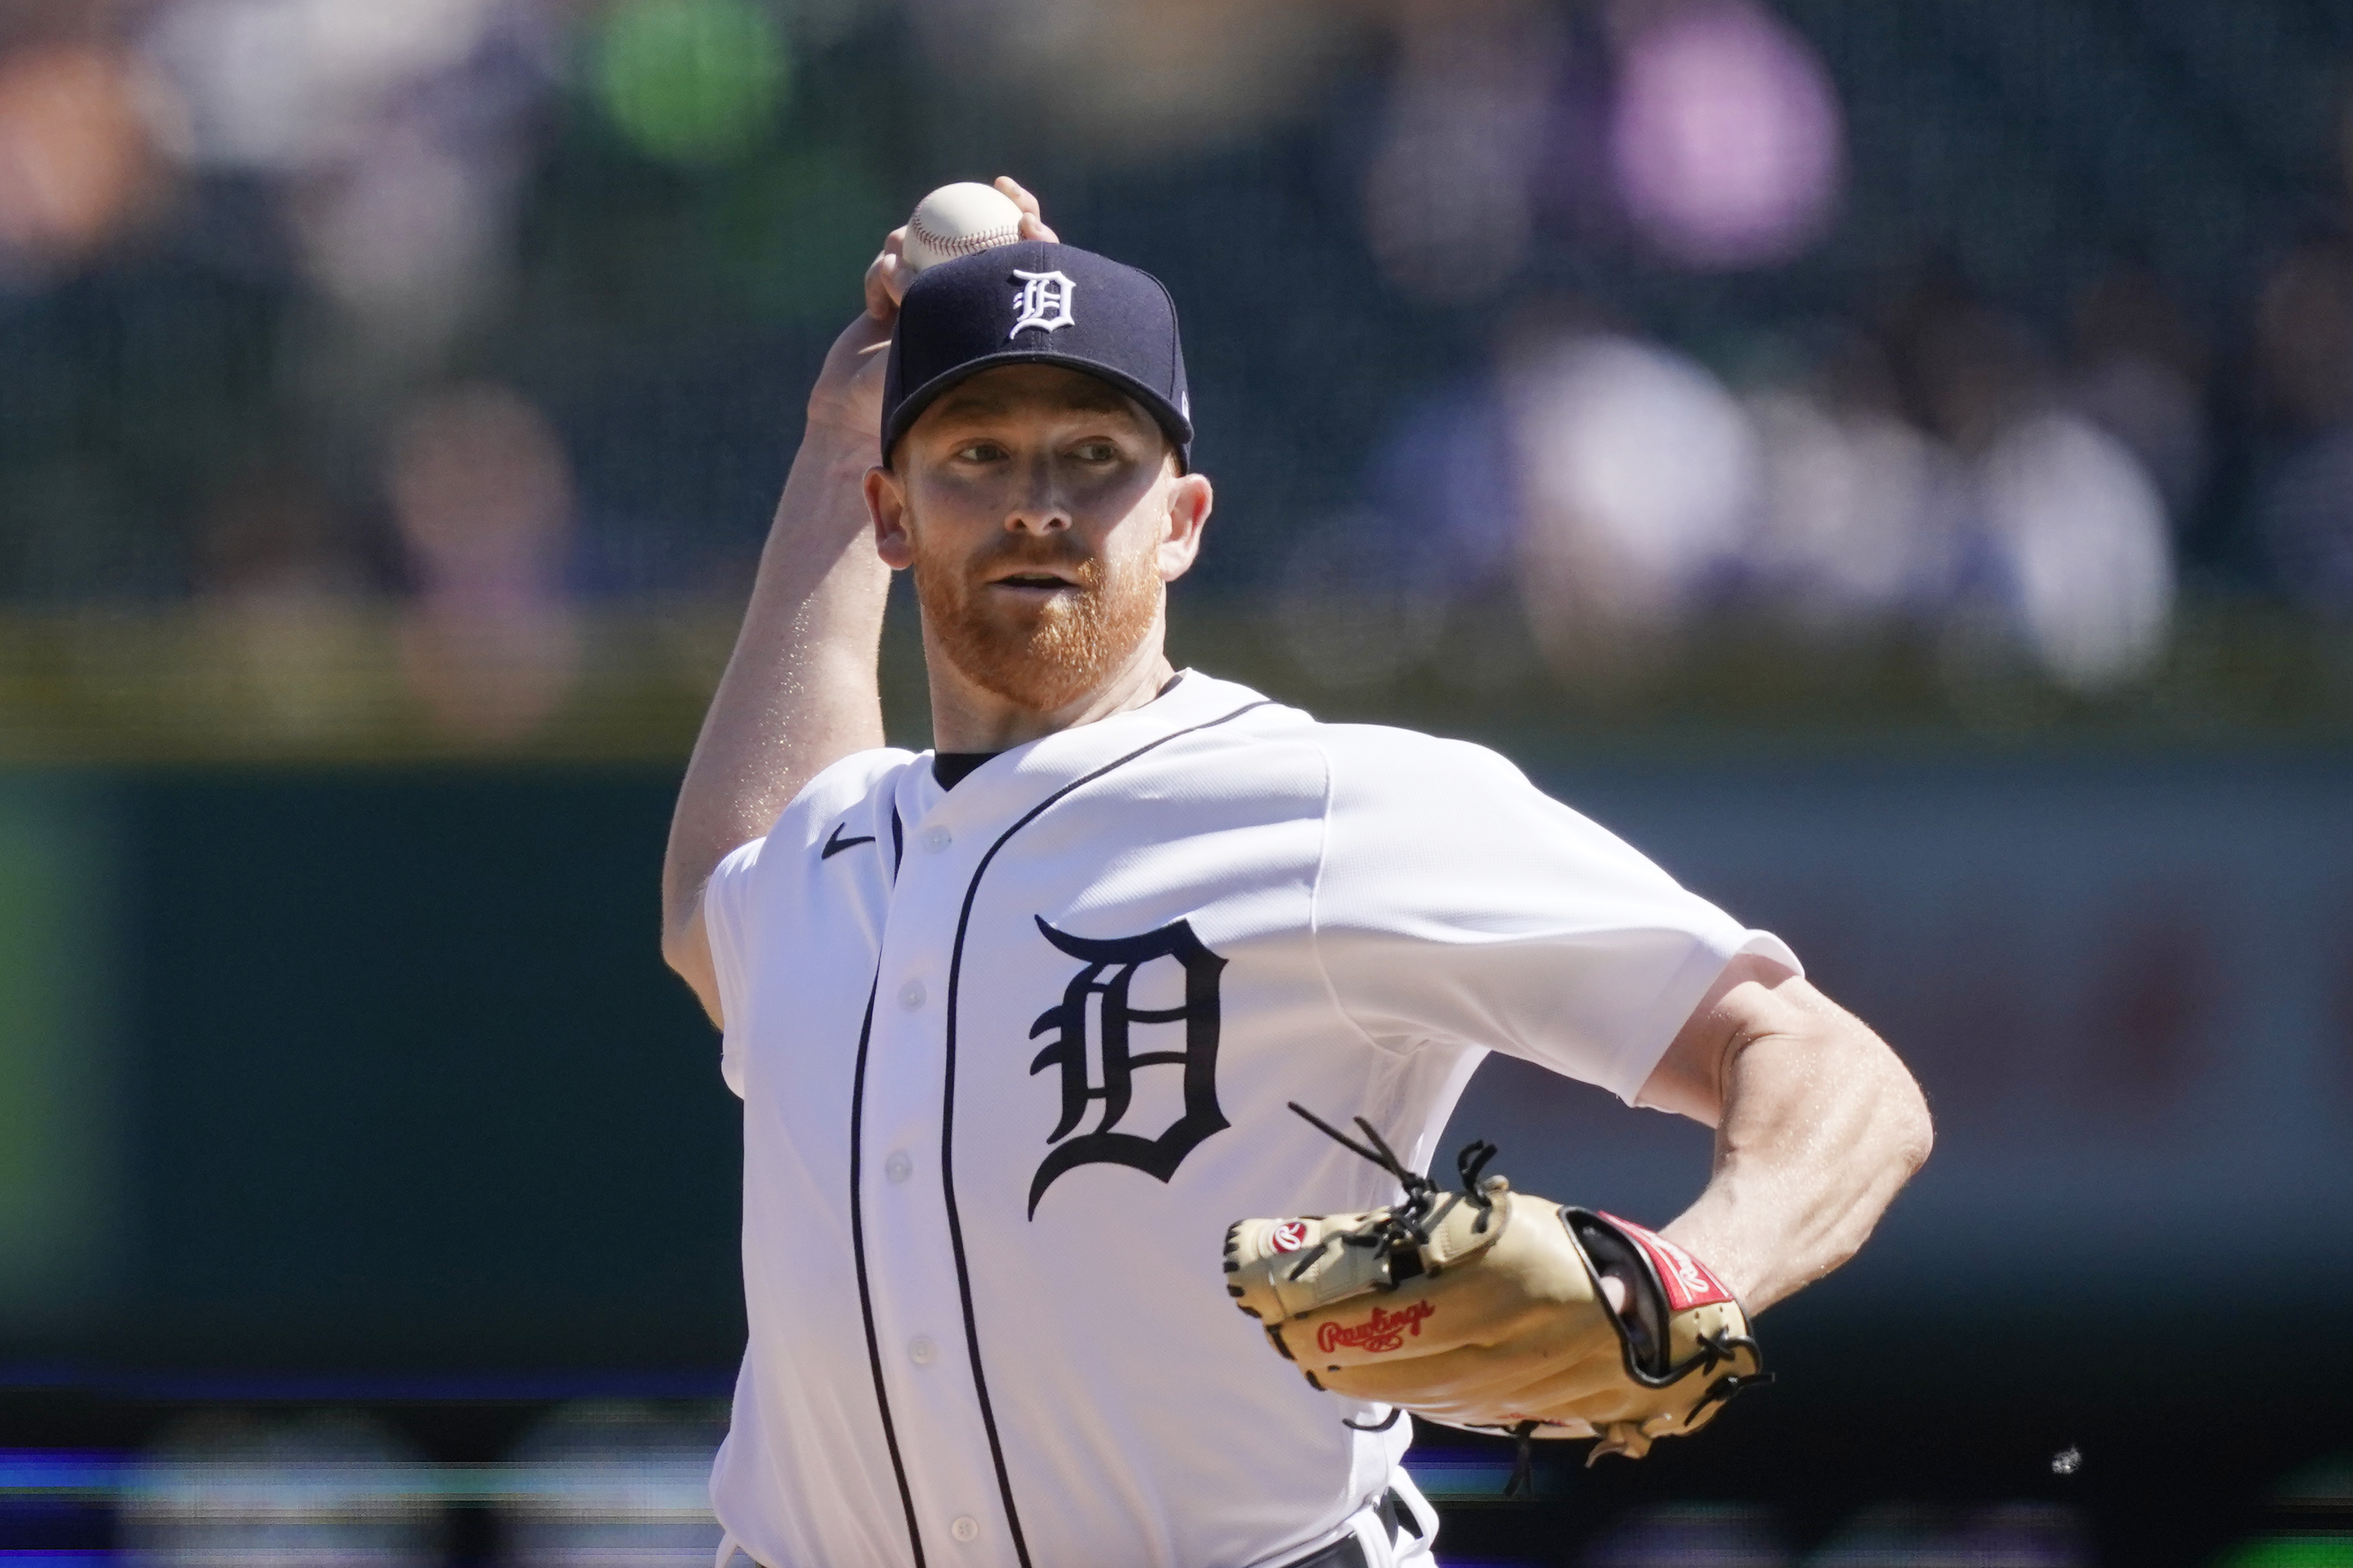 Detroit Tigers sign Spencer Turnbull to 2-year, $3.65 million deal